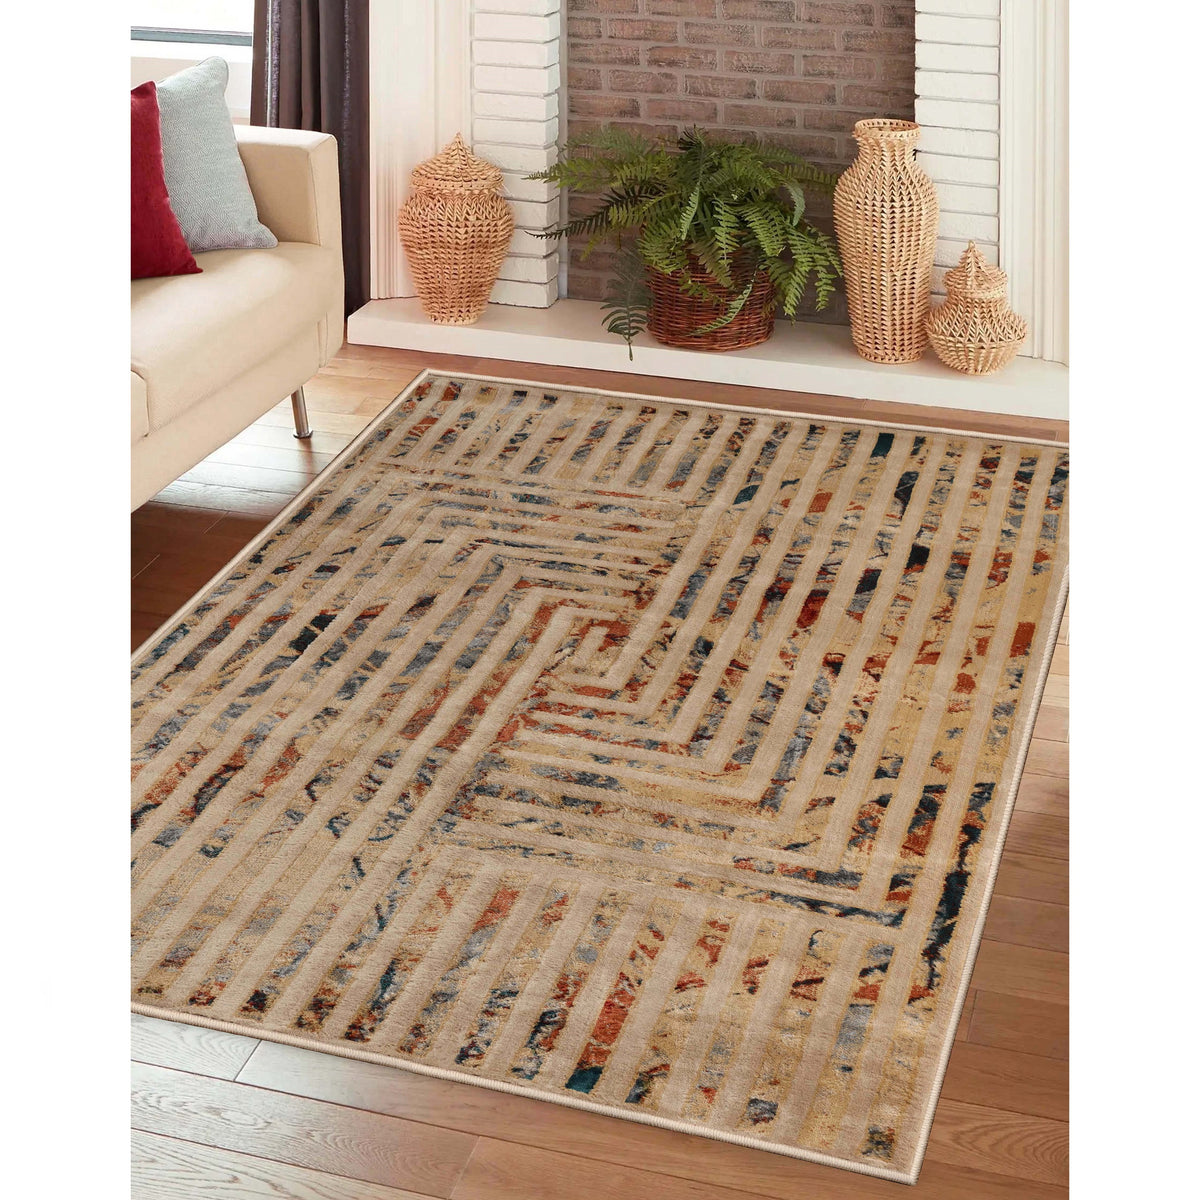 Modern Geometric Lines Abstract Boho Area Rug Or Runner Or Door Mat - Ivory